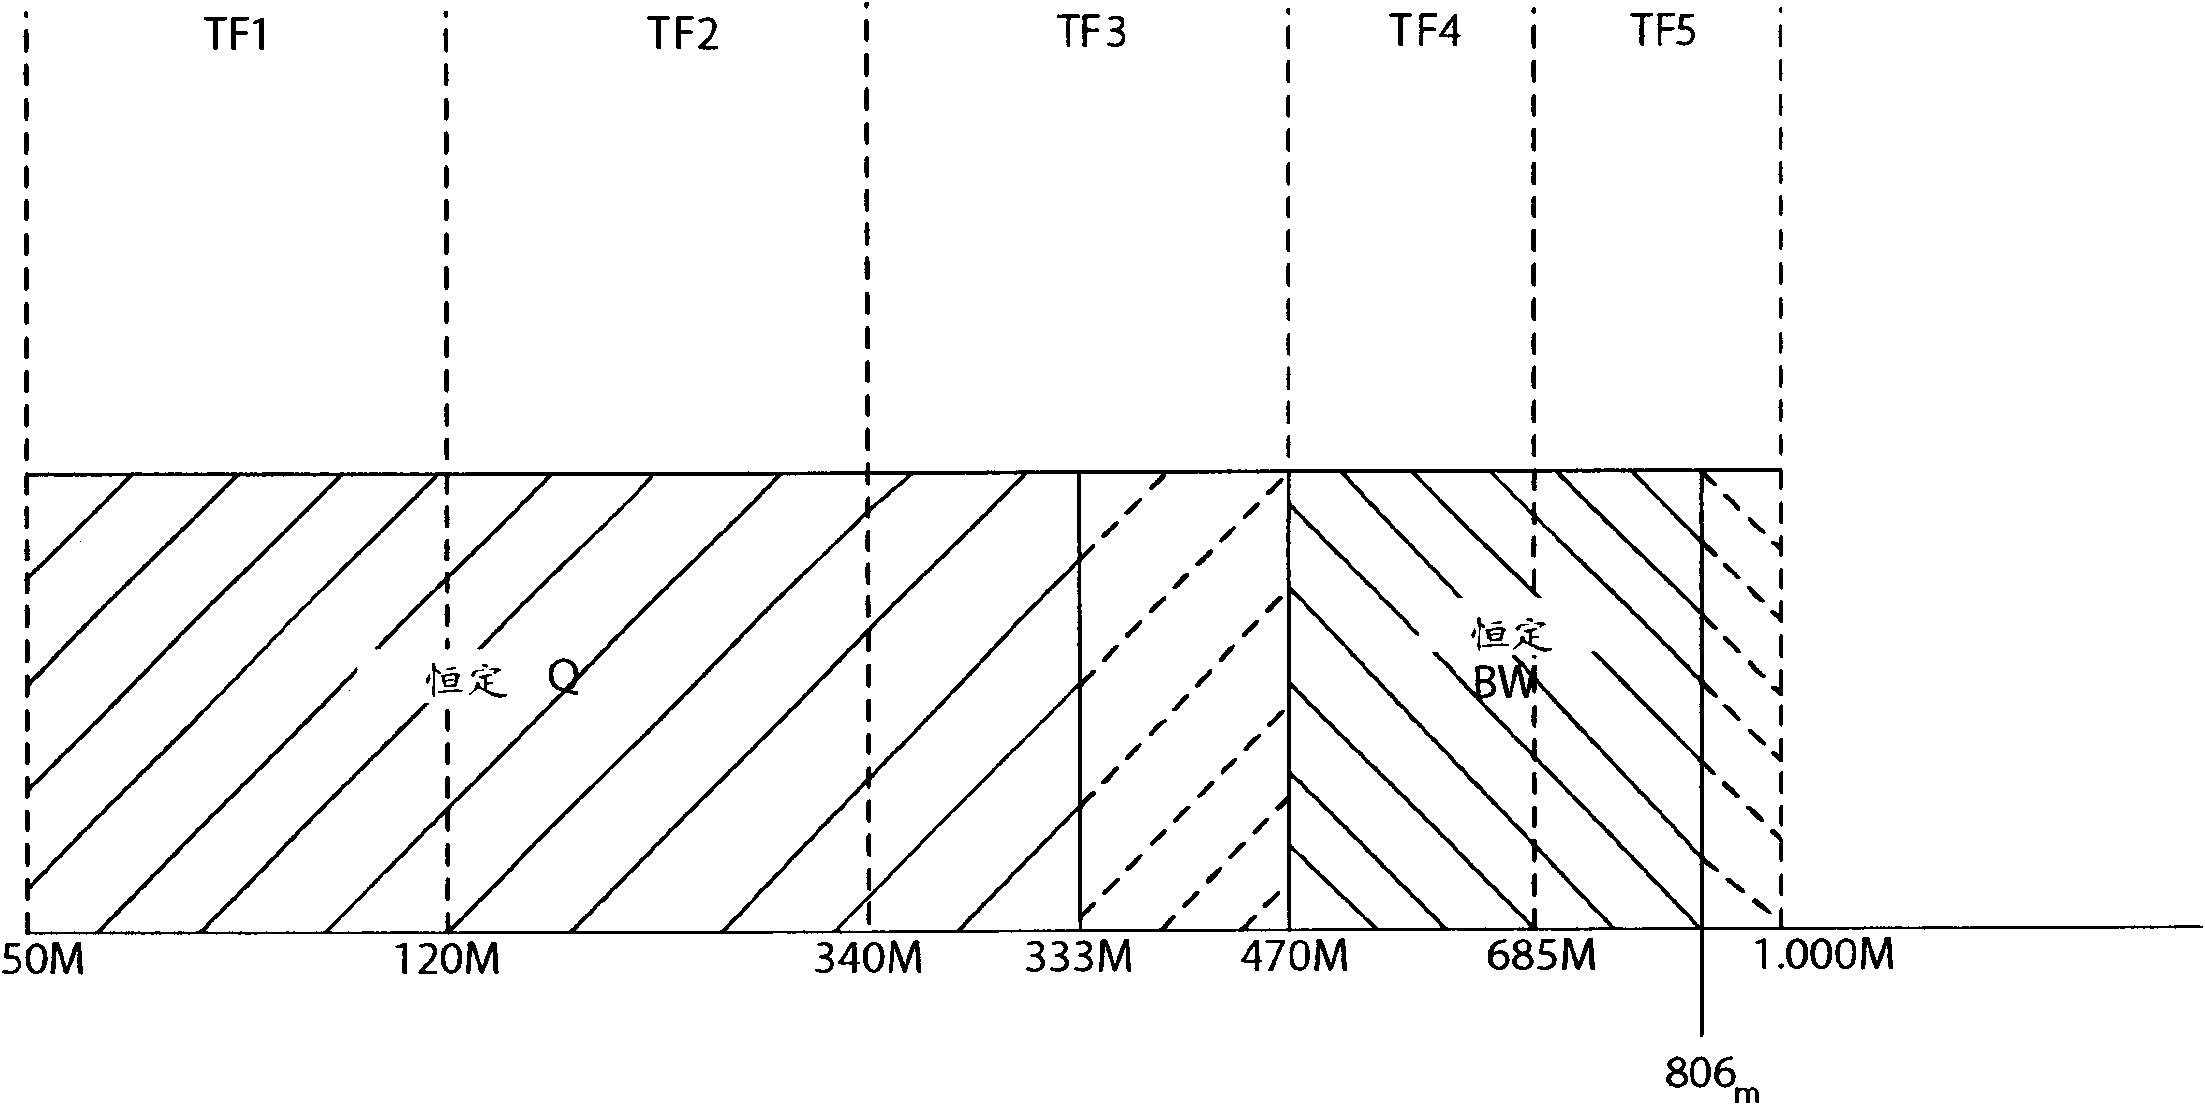 Tracking filter for a television tuner